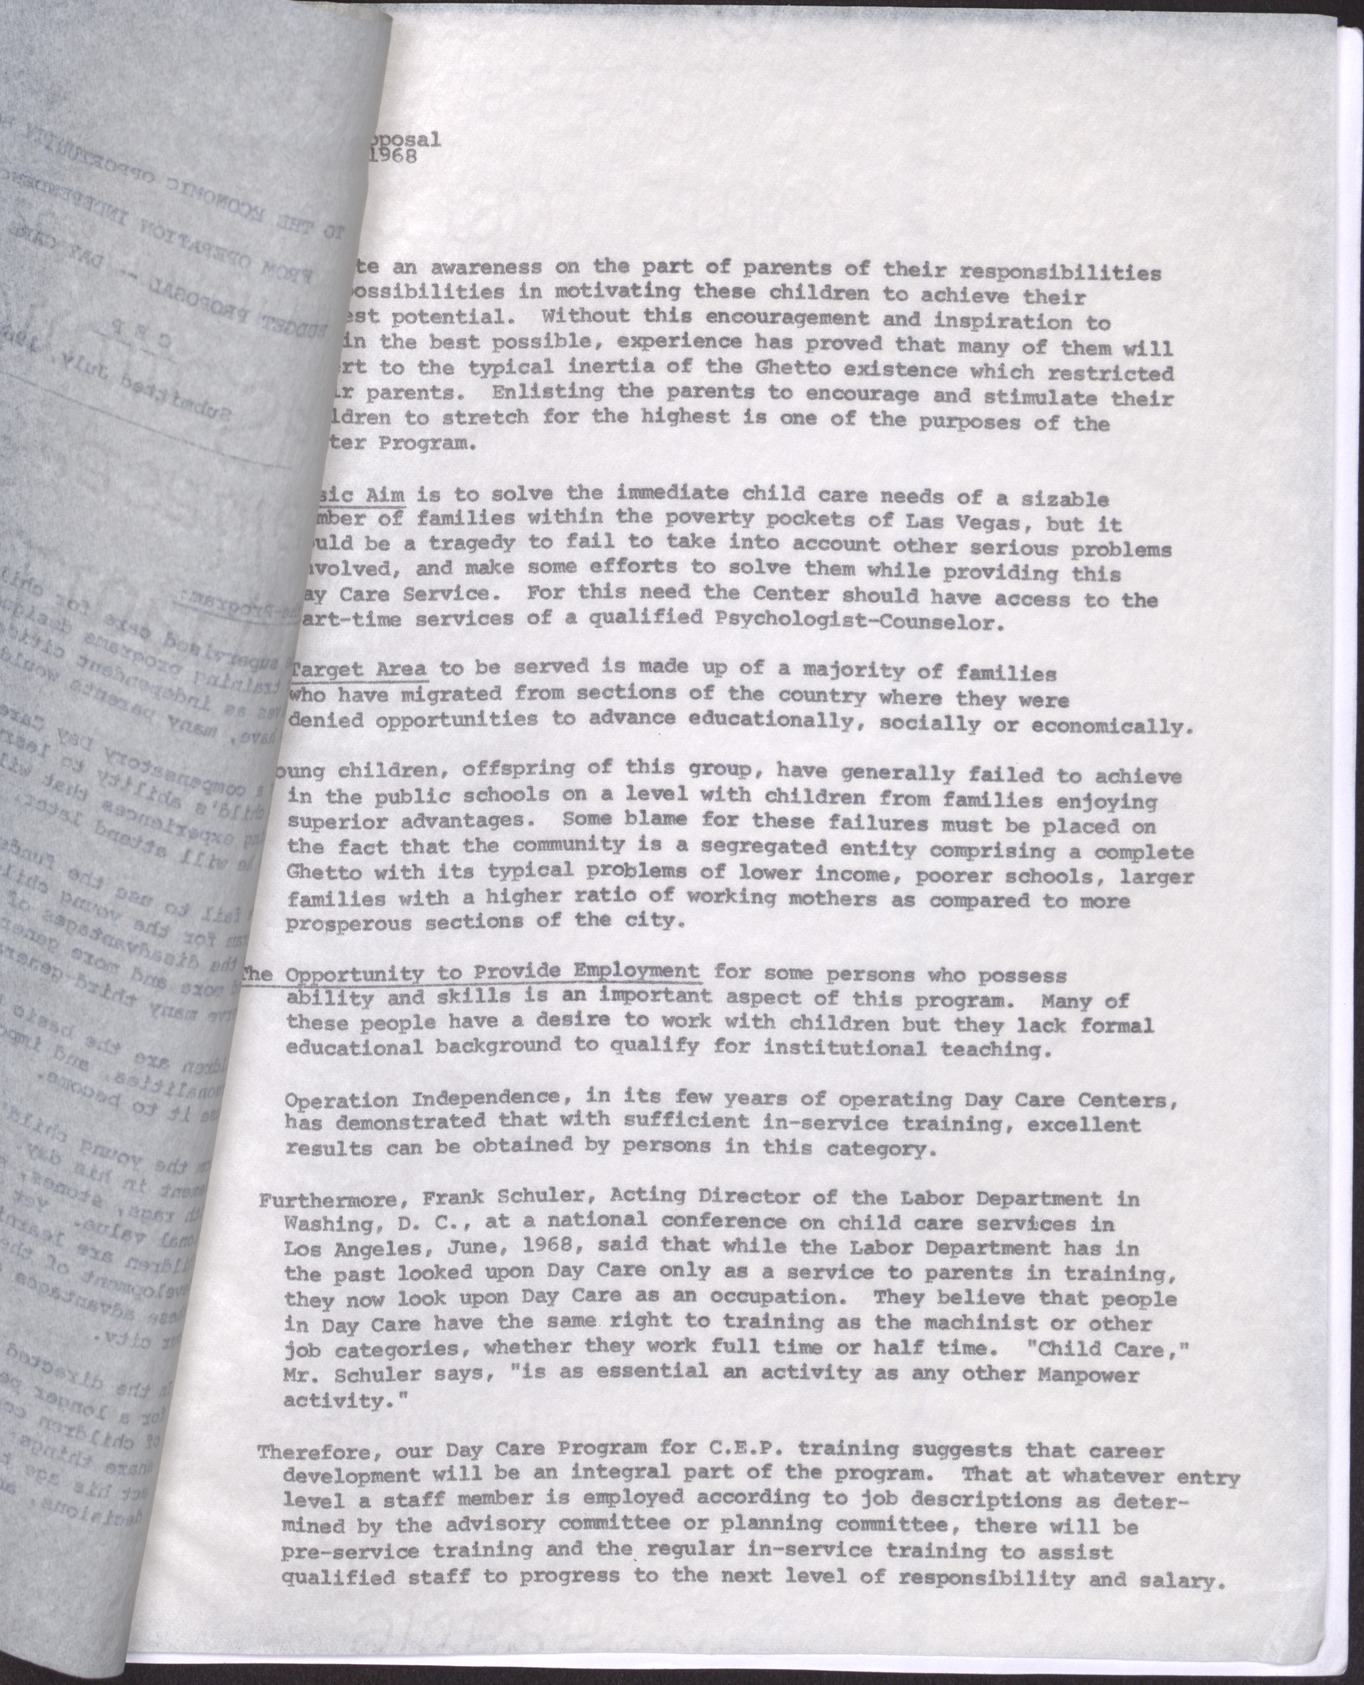 Budget Proposal to the EOB from Operation Independence (5 pages), July 1968, page 2